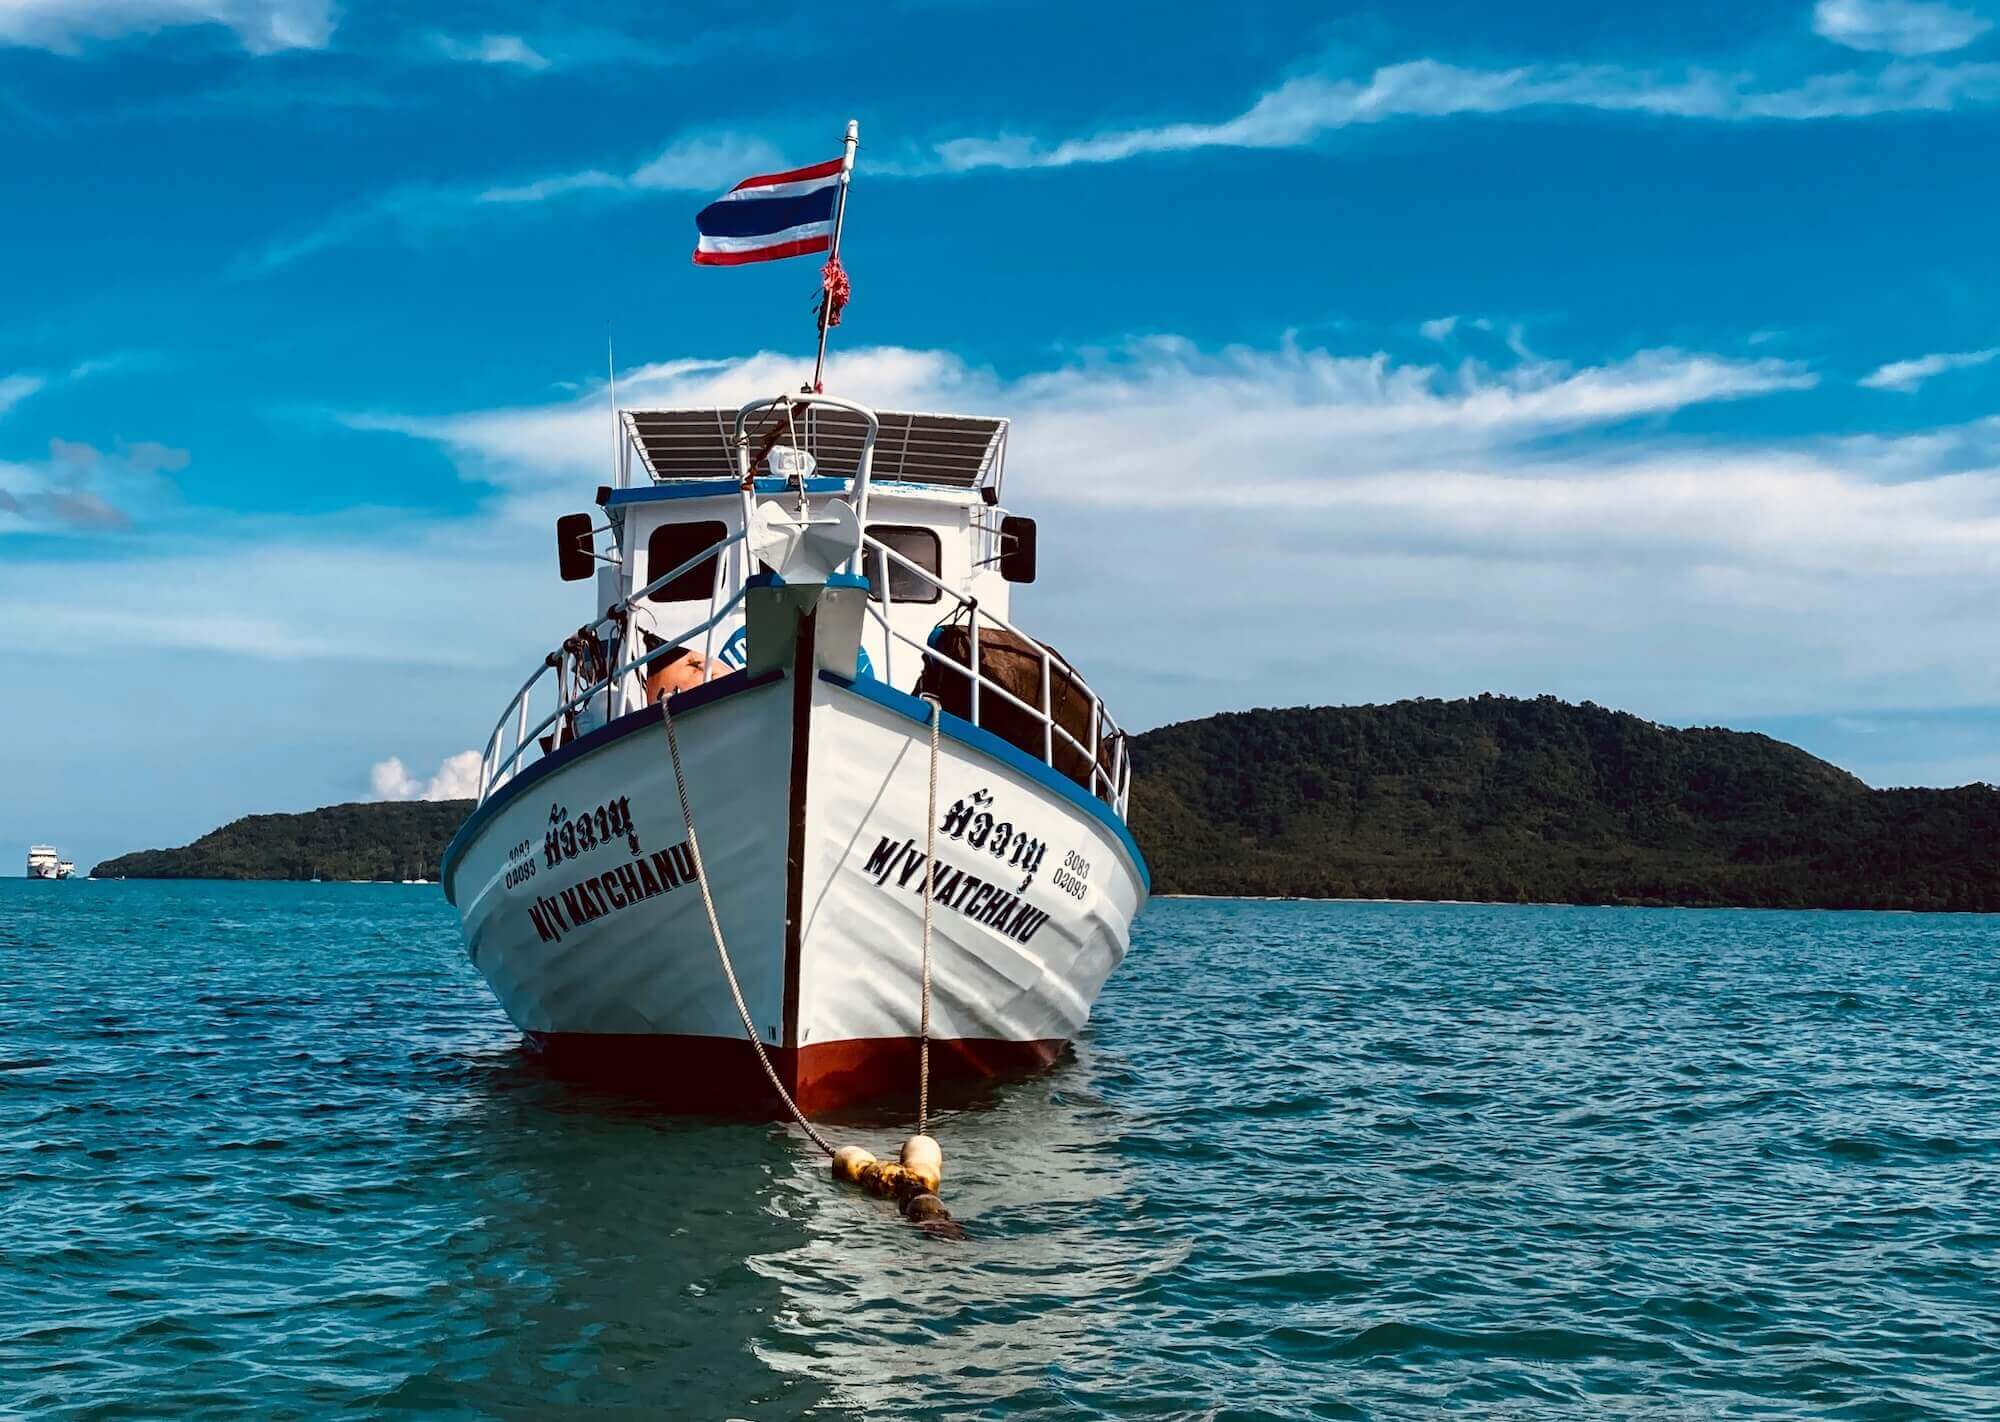 Dive Center For Sale - Successor wanted for profitable diving company with 16m vessel in Phuket, Thailand!